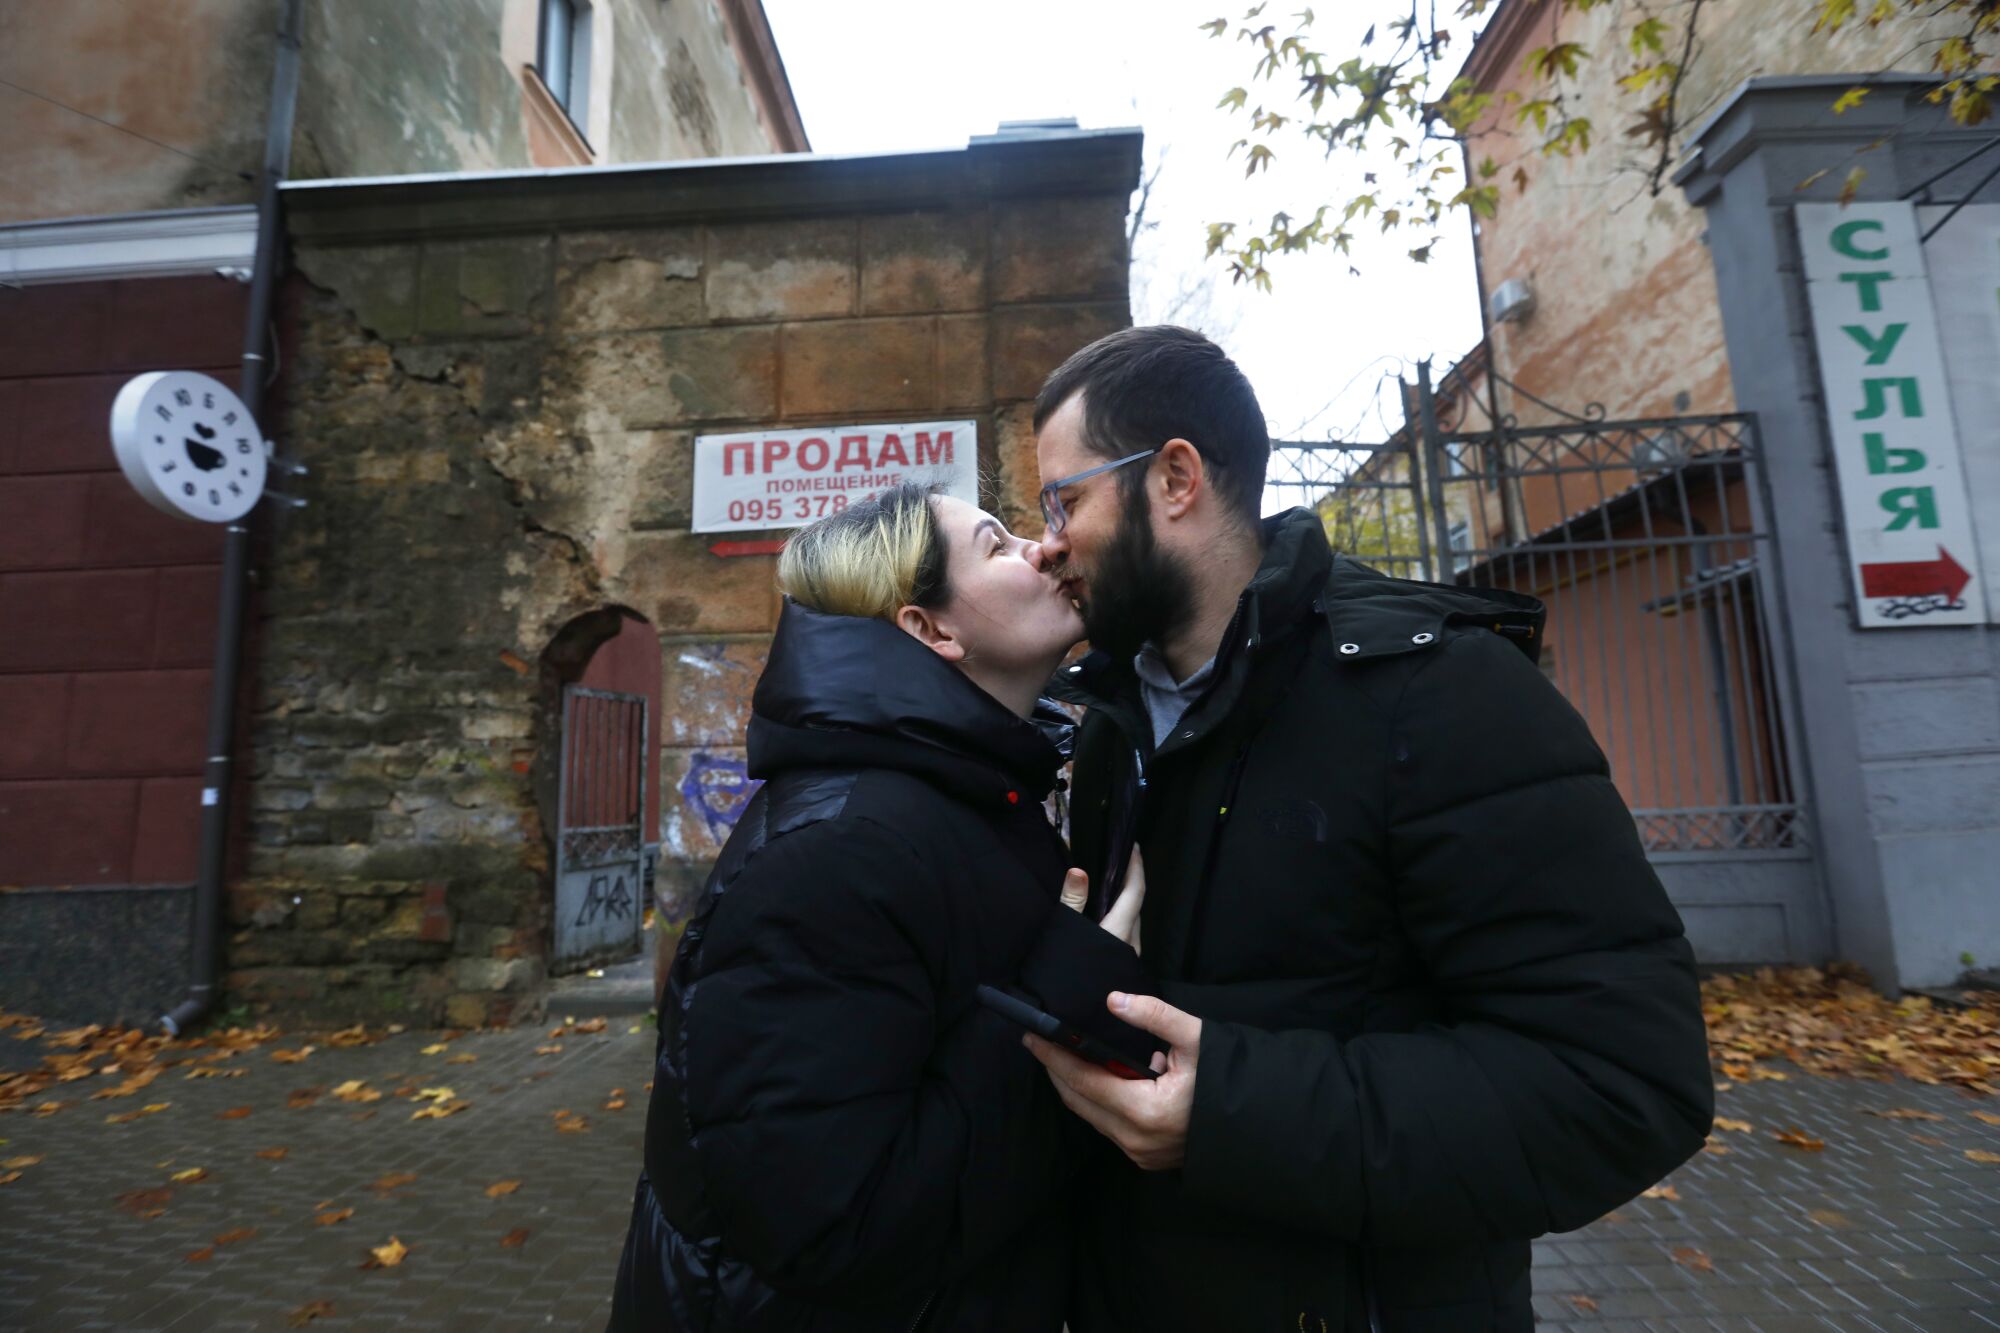 A woman, left, and a man, both in black puffer coats, share a kiss outside the gates of a building